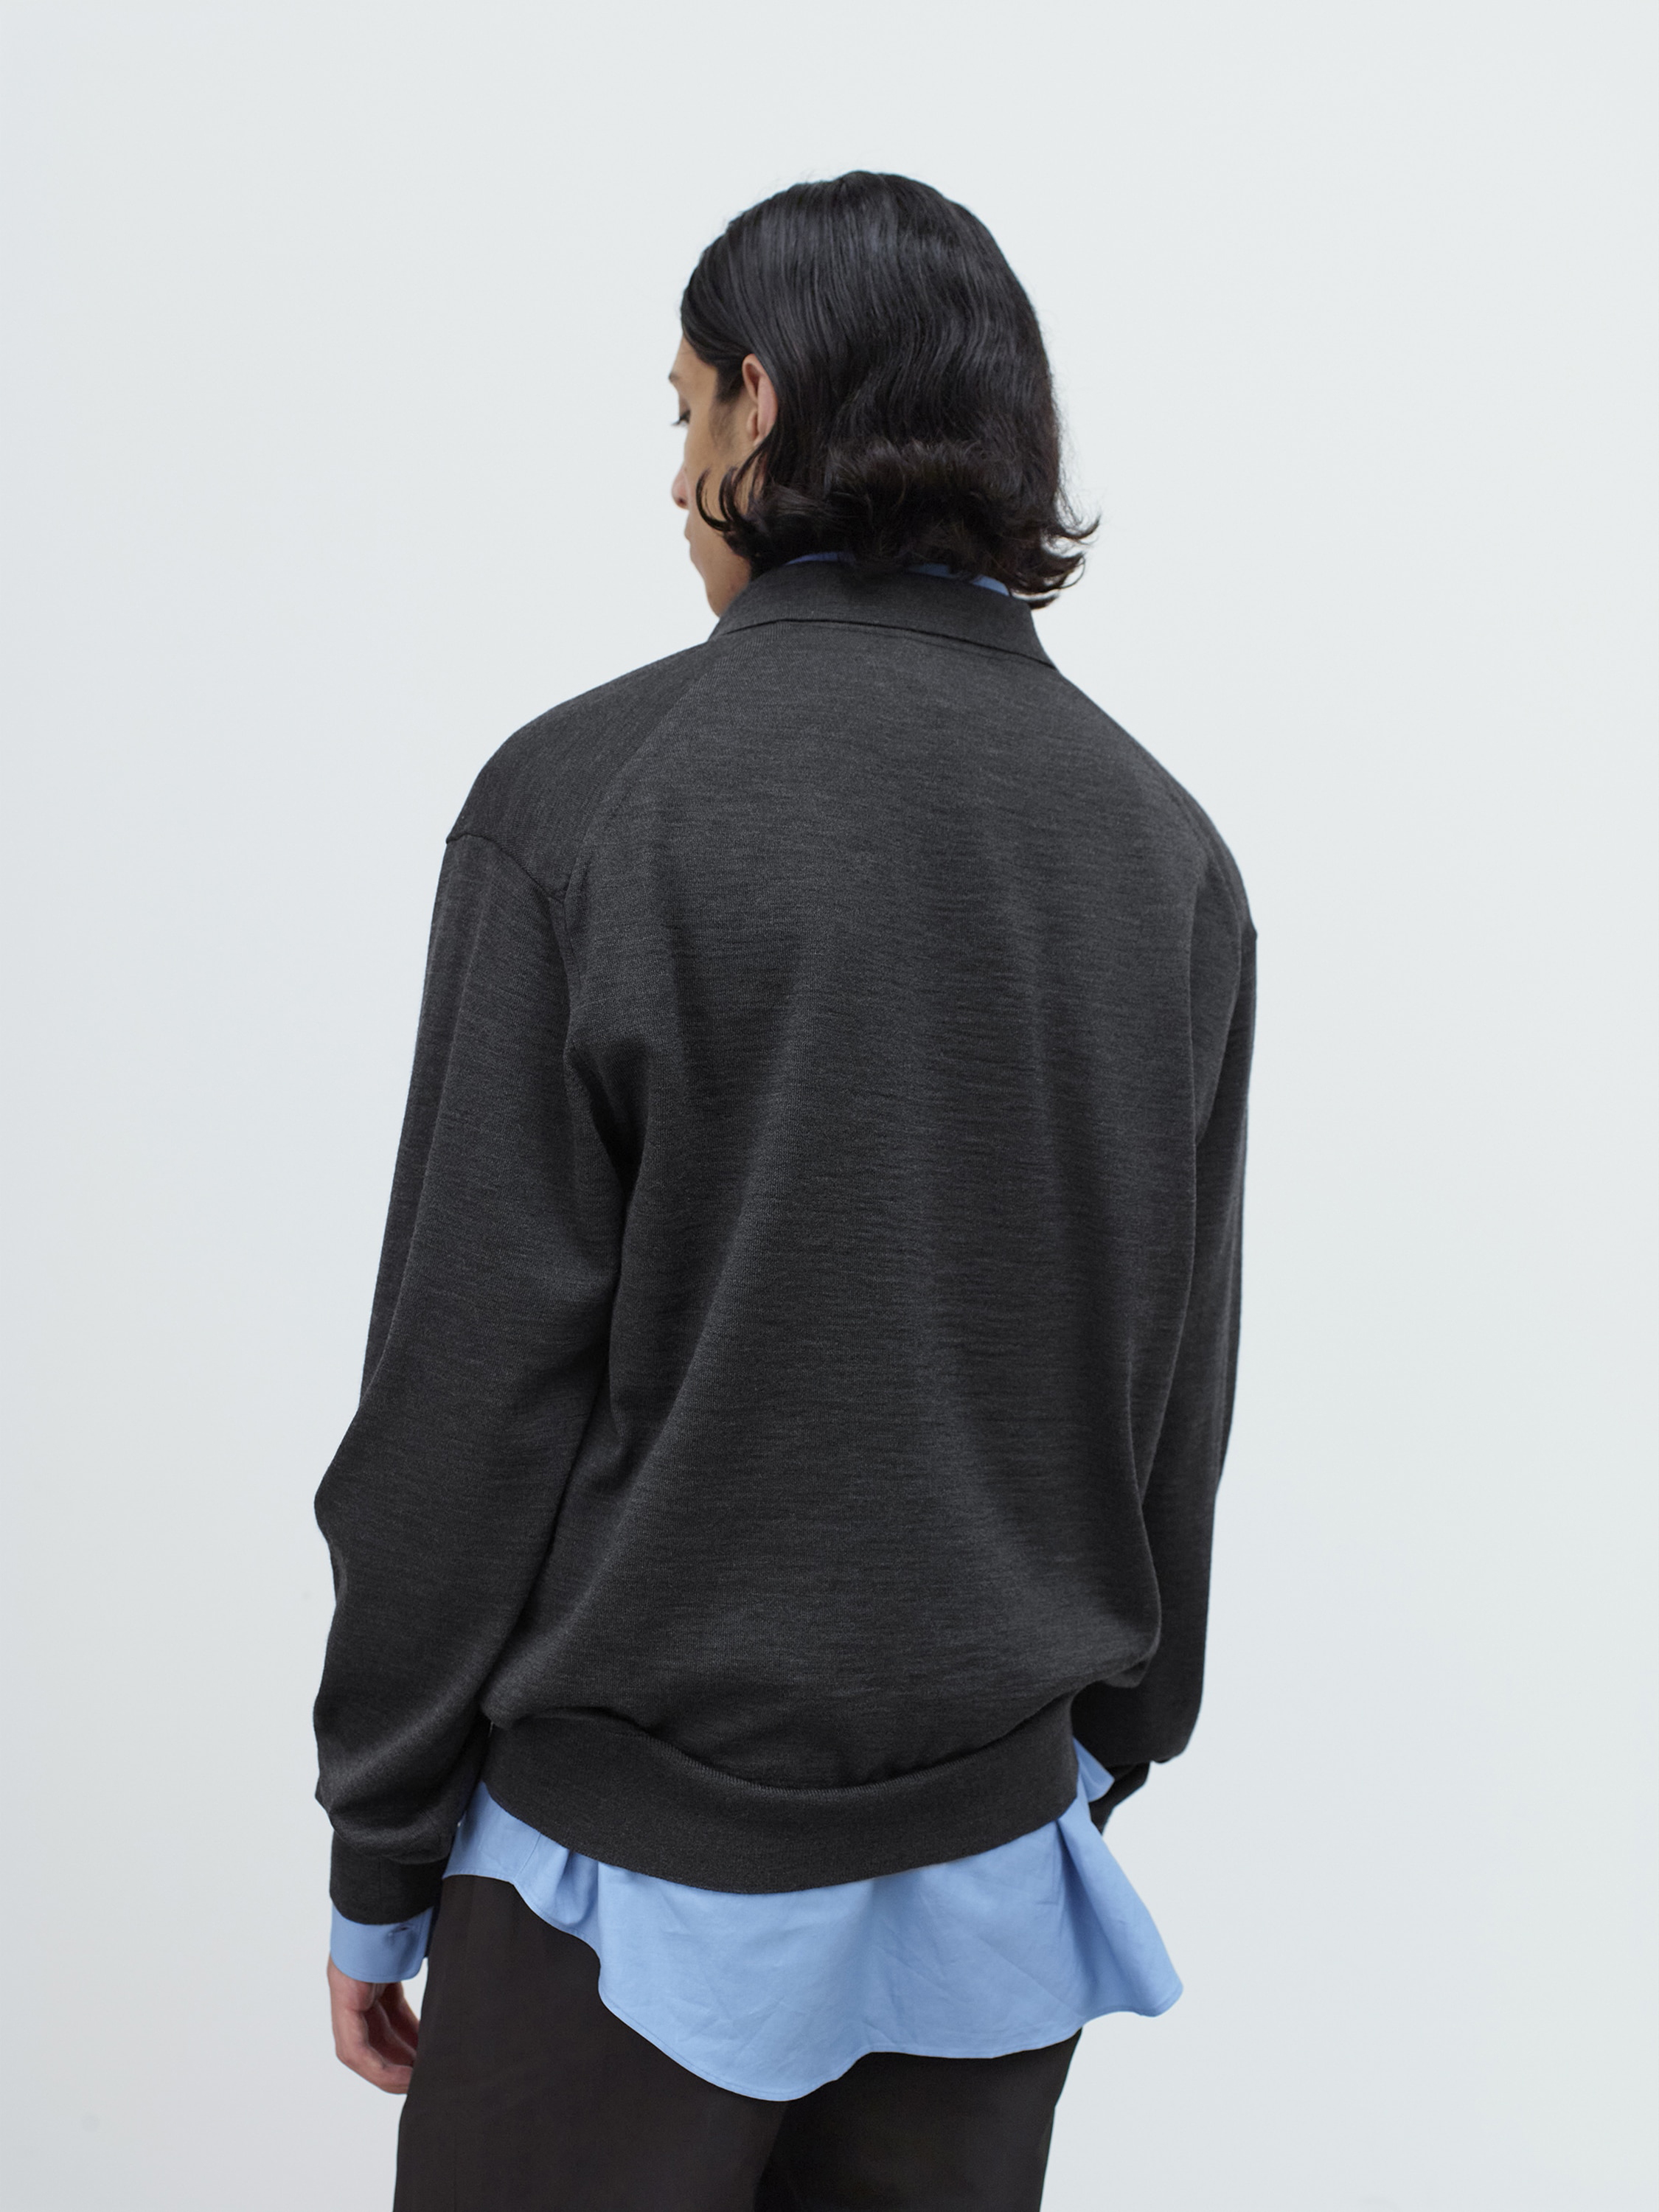 SUPER HIGH GAUGE WOOL KNIT POLO 詳細画像 TOP CHARCOAL 2